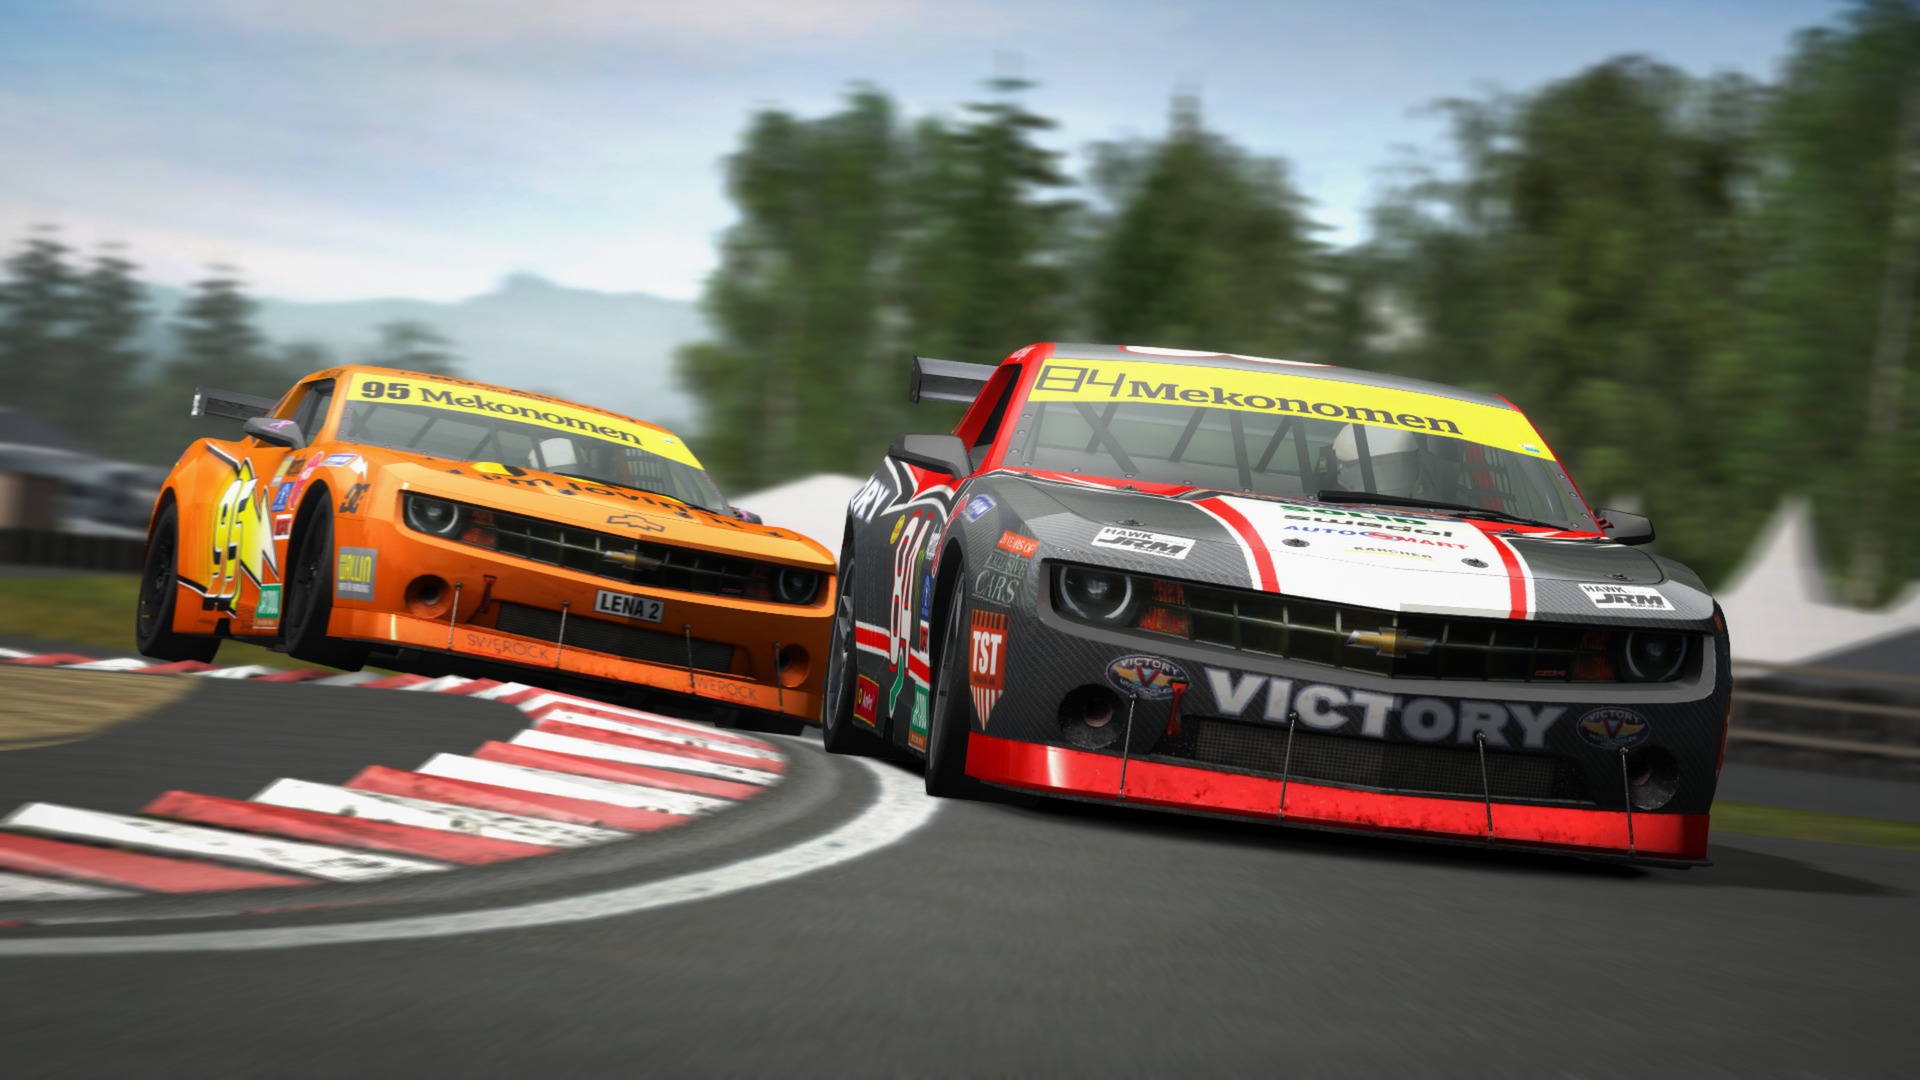 racing games for pc free download